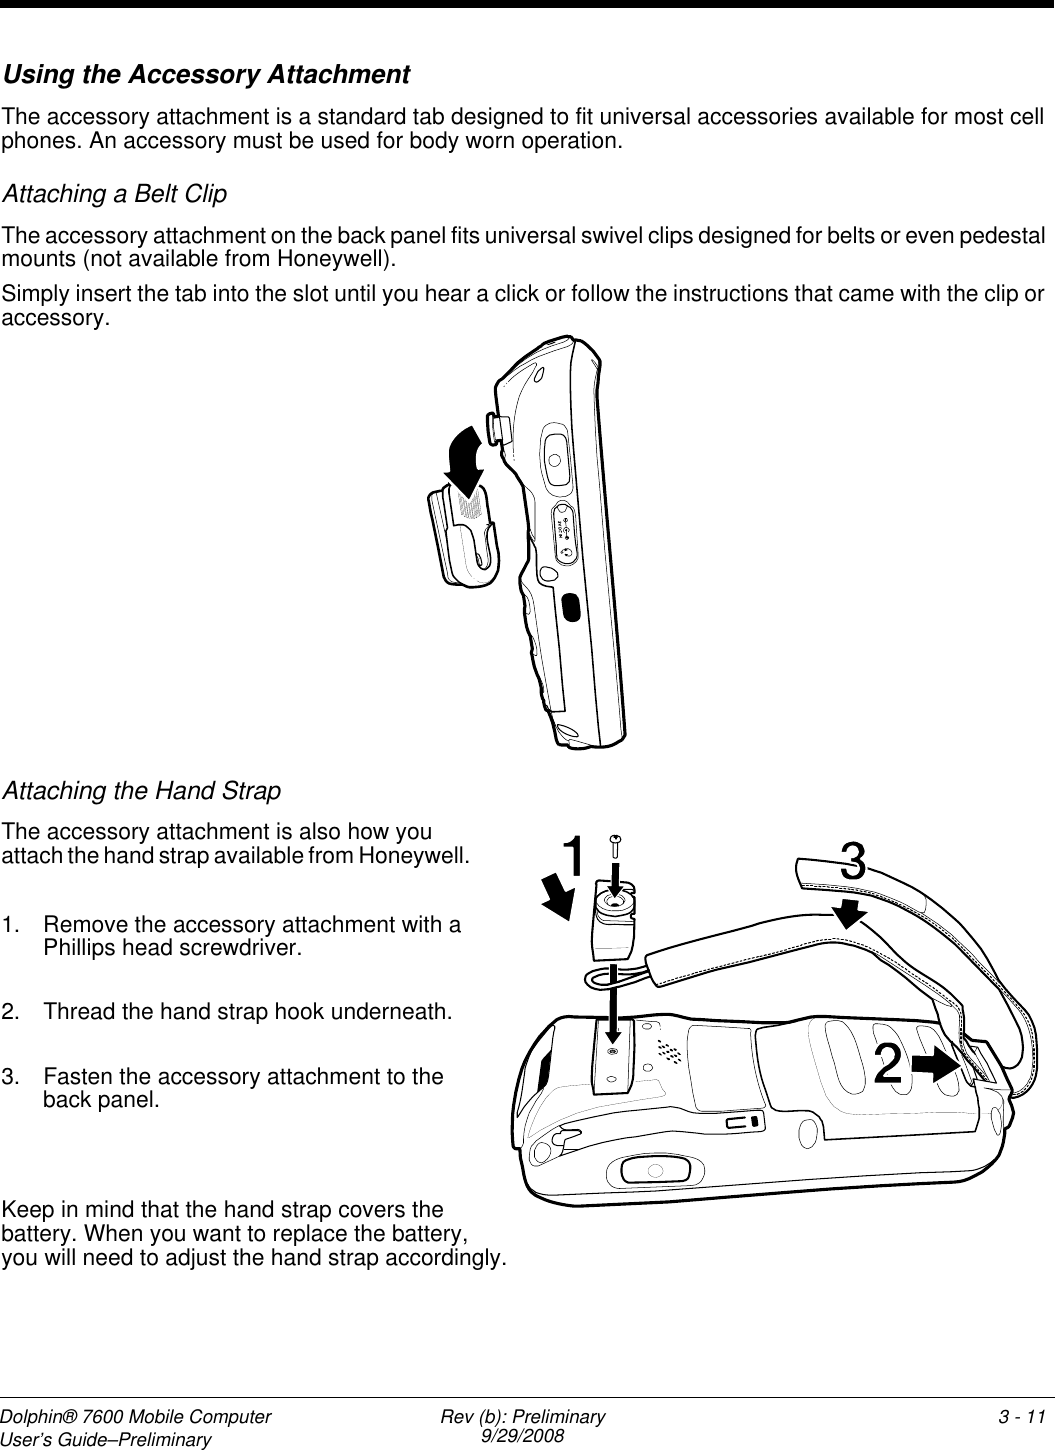 Dolphin® 7600 Mobile Computer User’s Guide–Preliminary Rev (b): Preliminary9/29/2008 3 - 11Using the Accessory AttachmentThe accessory attachment is a standard tab designed to fit universal accessories available for most cell phones. An accessory must be used for body worn operation.Attaching a Belt ClipThe accessory attachment on the back panel fits universal swivel clips designed for belts or even pedestal mounts (not available from Honeywell). Simply insert the tab into the slot until you hear a click or follow the instructions that came with the clip or accessory.Attaching the Hand StrapThe accessory attachment is also how you attach the hand strap available from Honeywell. 1. Remove the accessory attachment with a Phillips head screwdriver. 2. Thread the hand strap hook underneath.3. Fasten the accessory attachment to the back panel.Keep in mind that the hand strap covers the battery. When you want to replace the battery, you will need to adjust the hand strap accordingly.